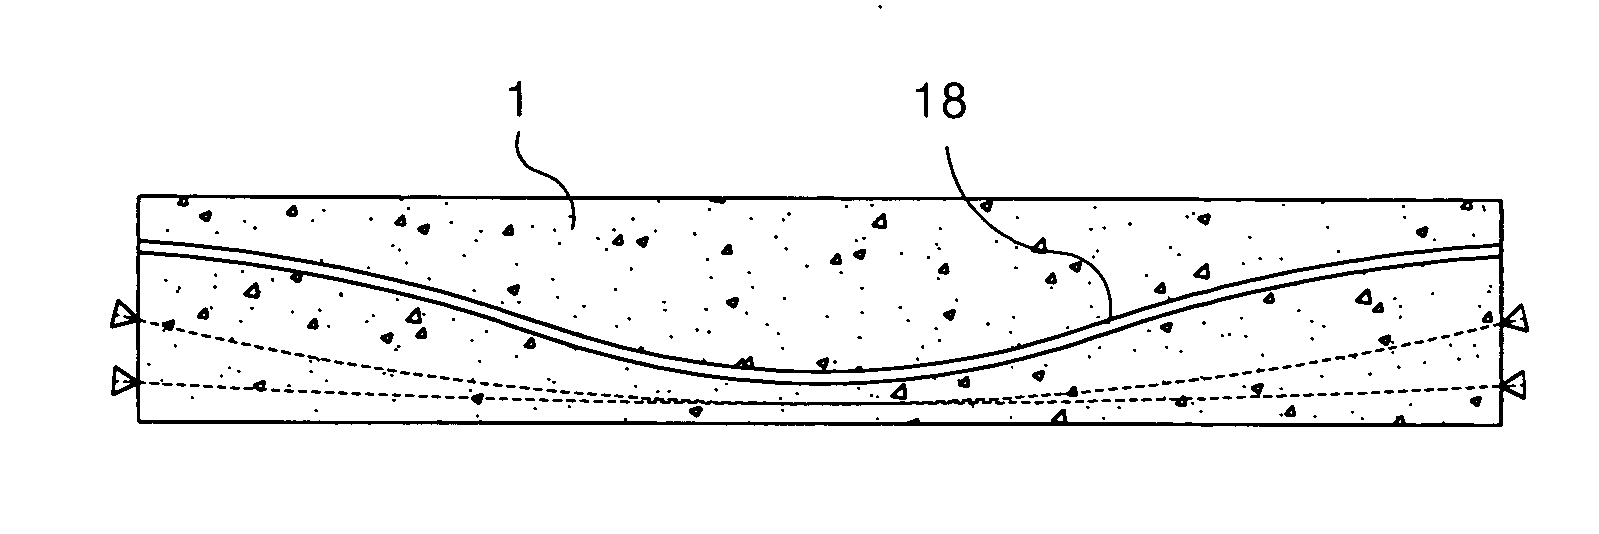 Structure and method of connecting I-type prestressed concrete beams using steel brackets